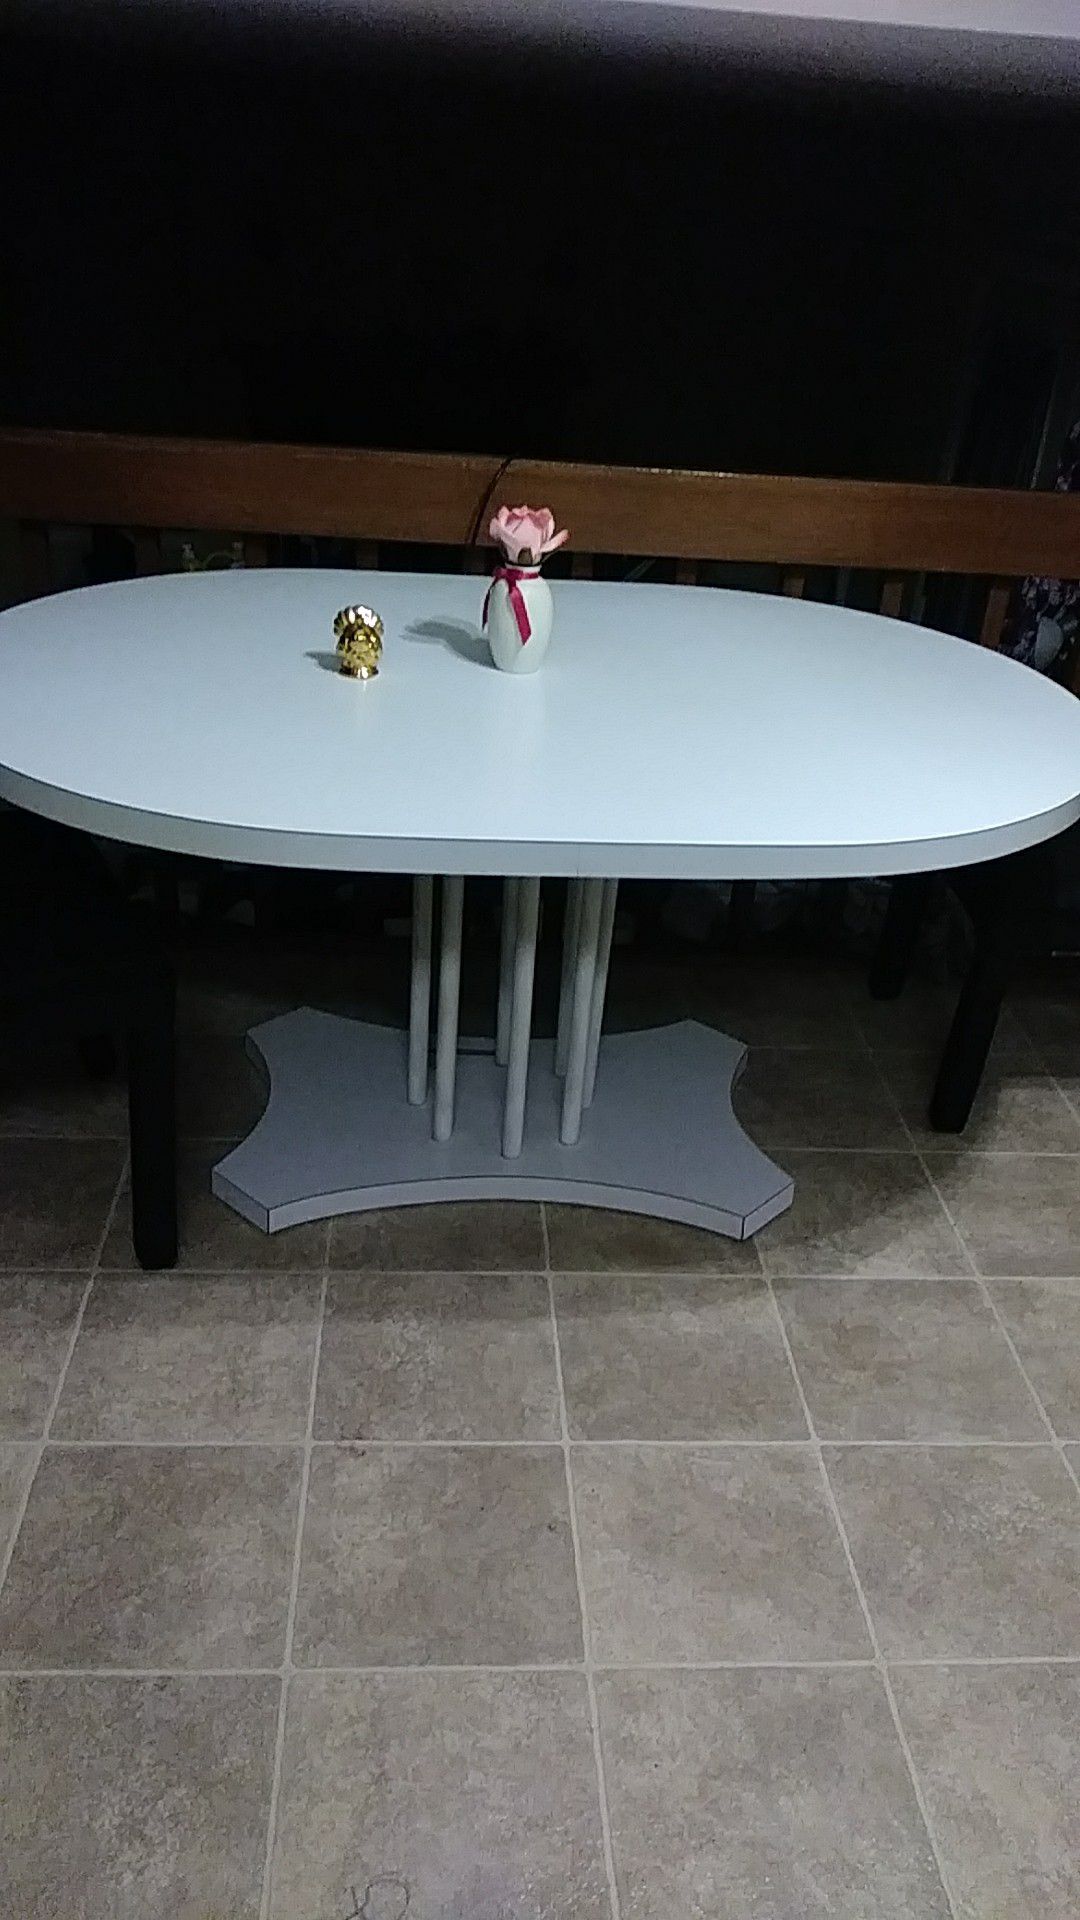 Formica table kitchen table or dining room table excellent condition like new $75 must see to believe